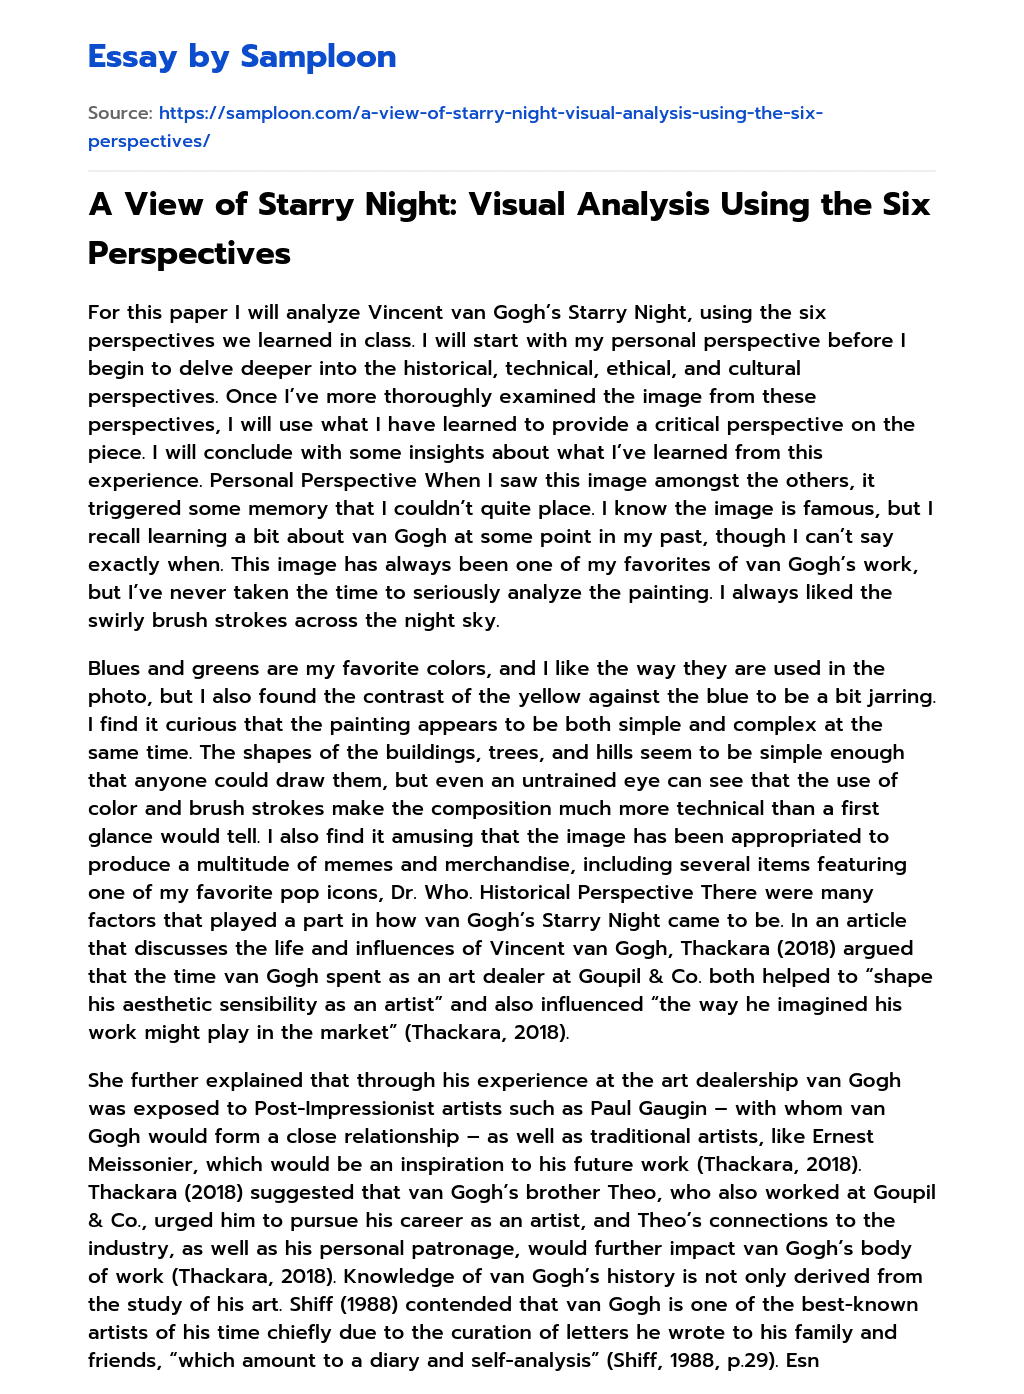 A View of Starry Night: Visual Analysis Using the Six Perspectives  essay